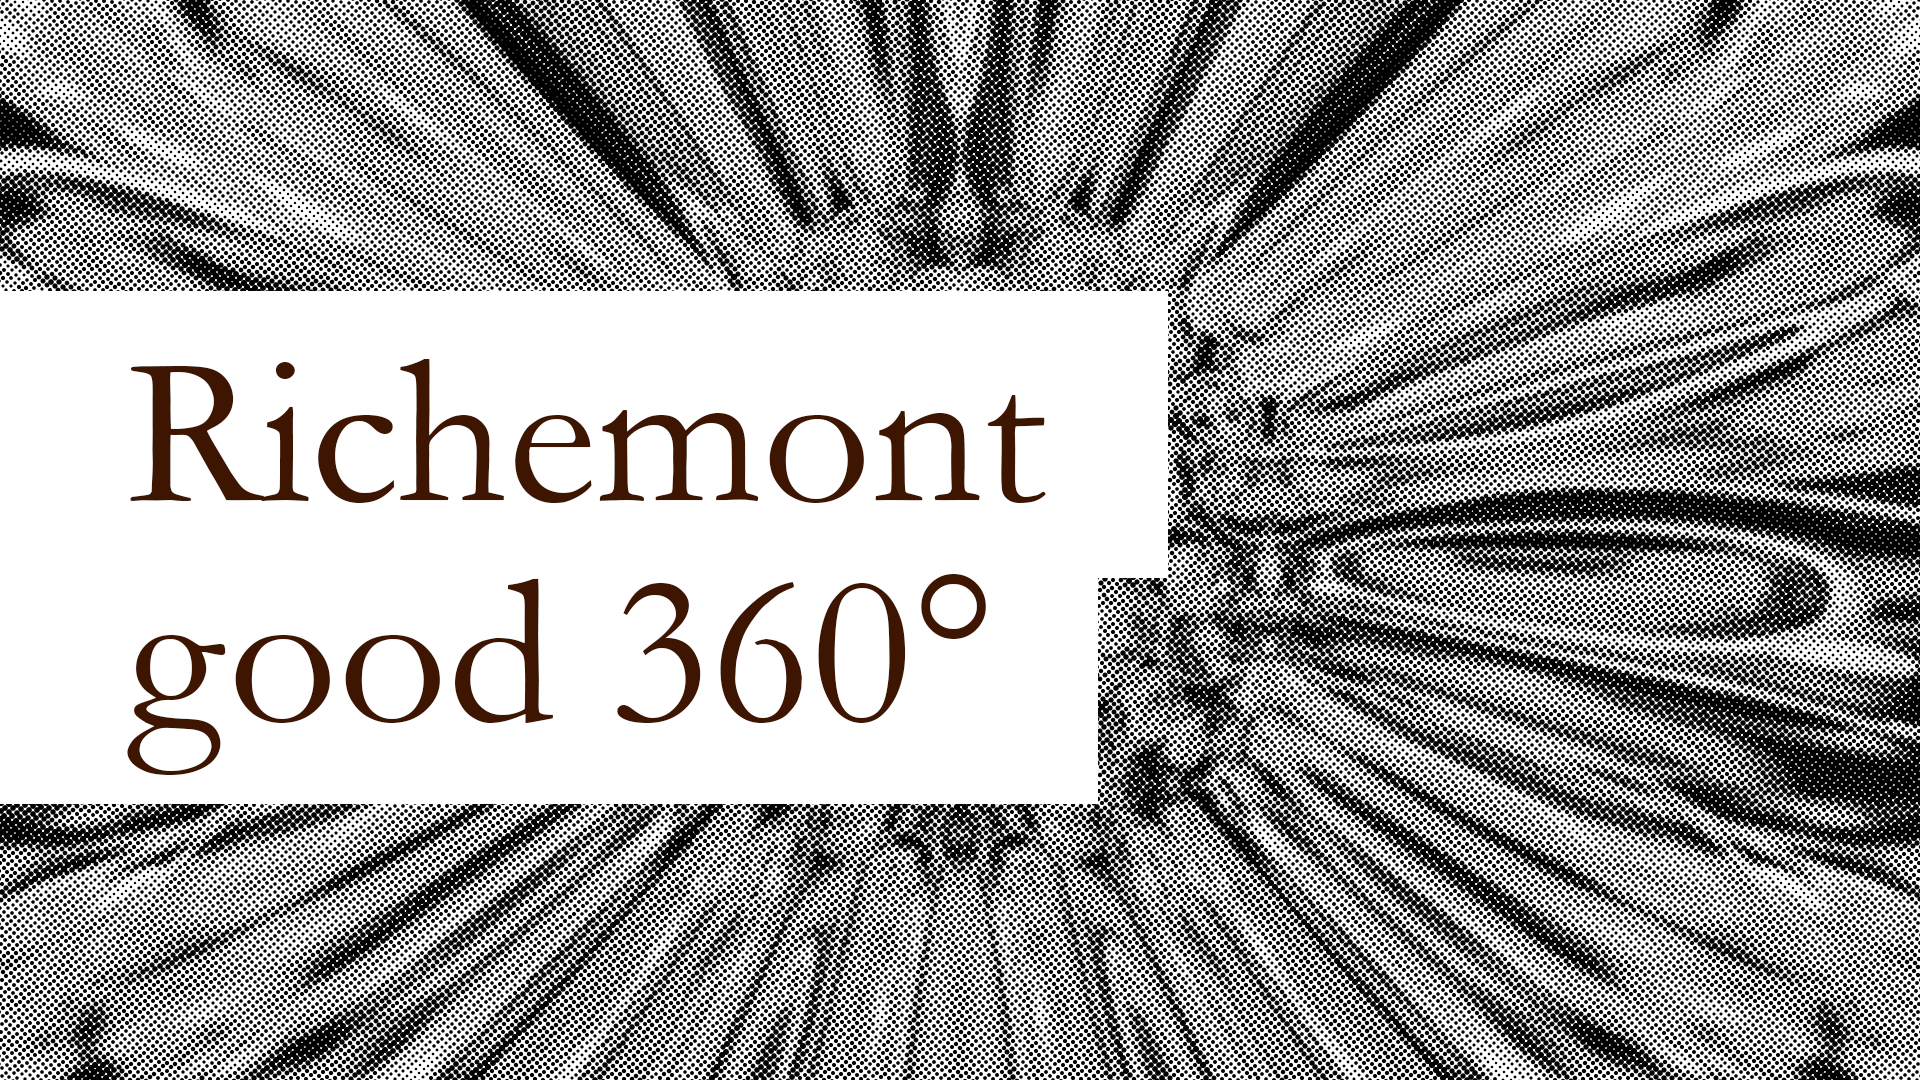 Richemont: luxury with good 360° View